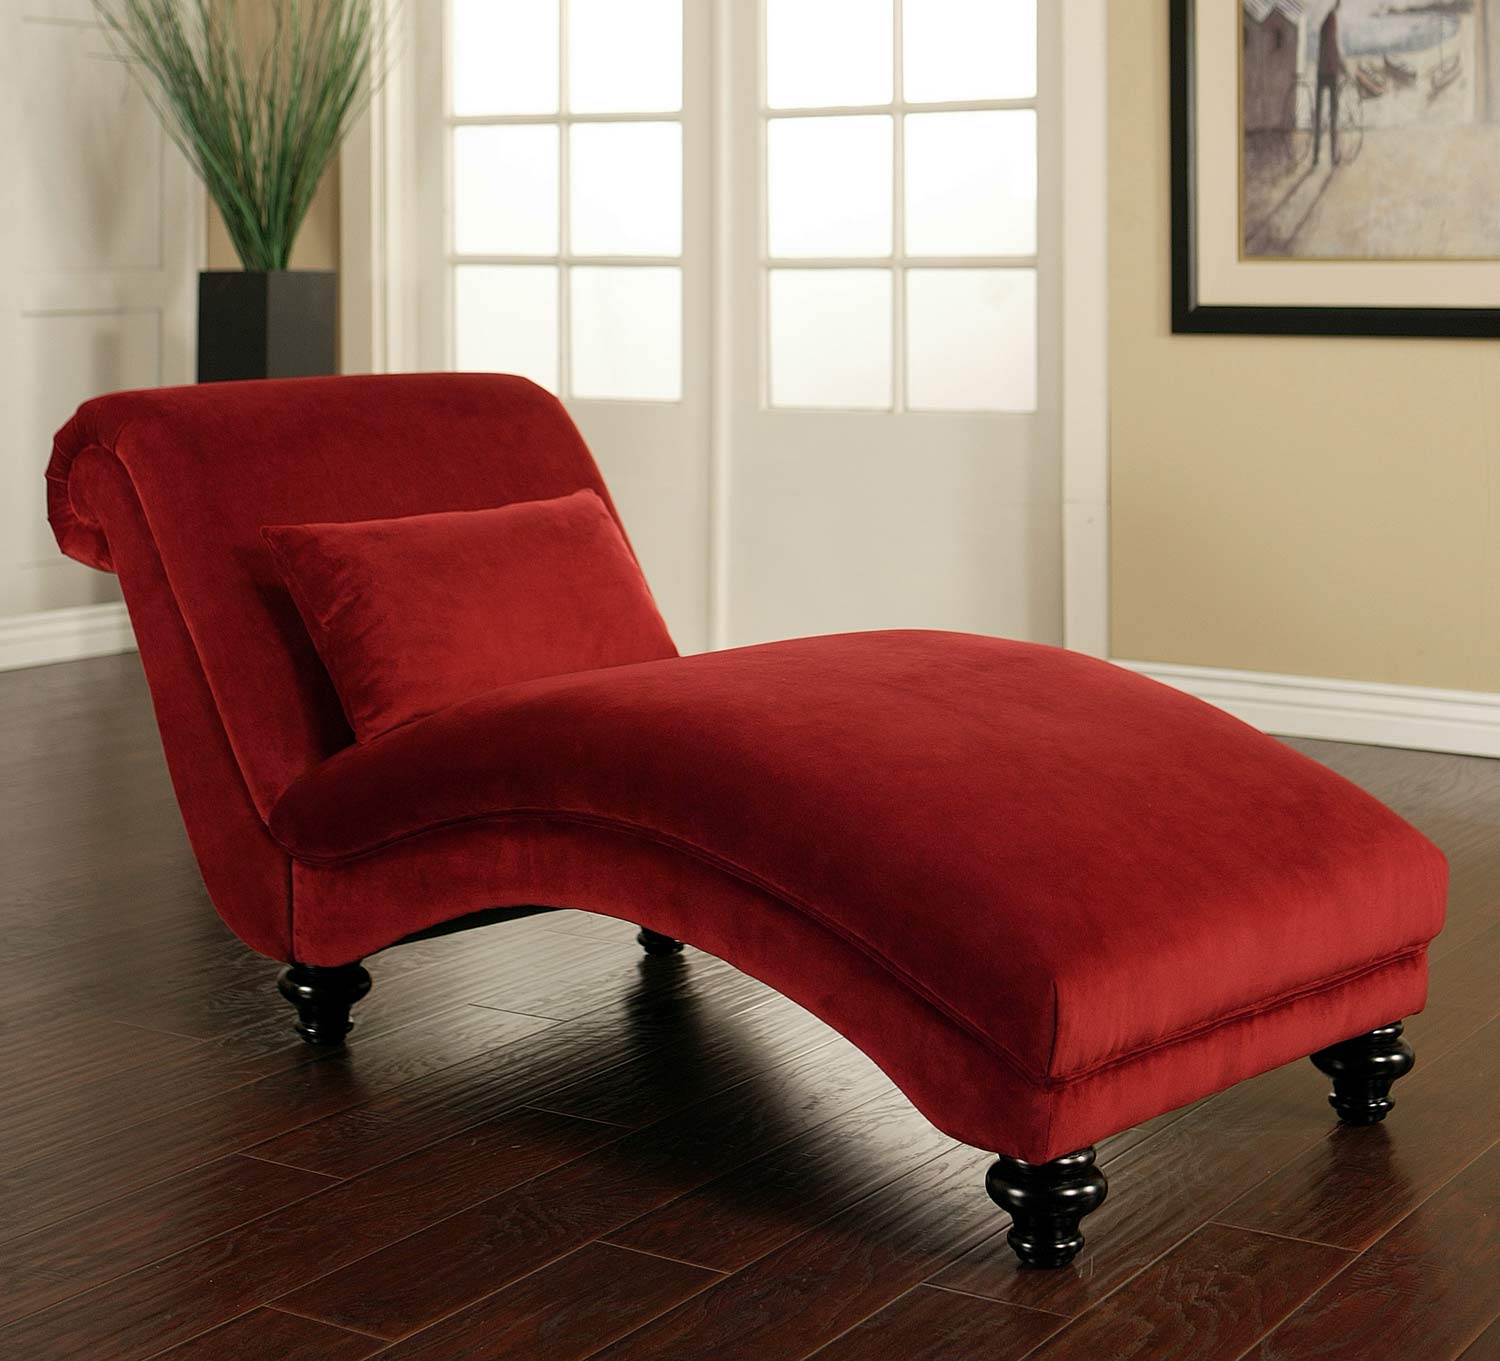 Abbyson Living Harbor Red Fabric Chaise